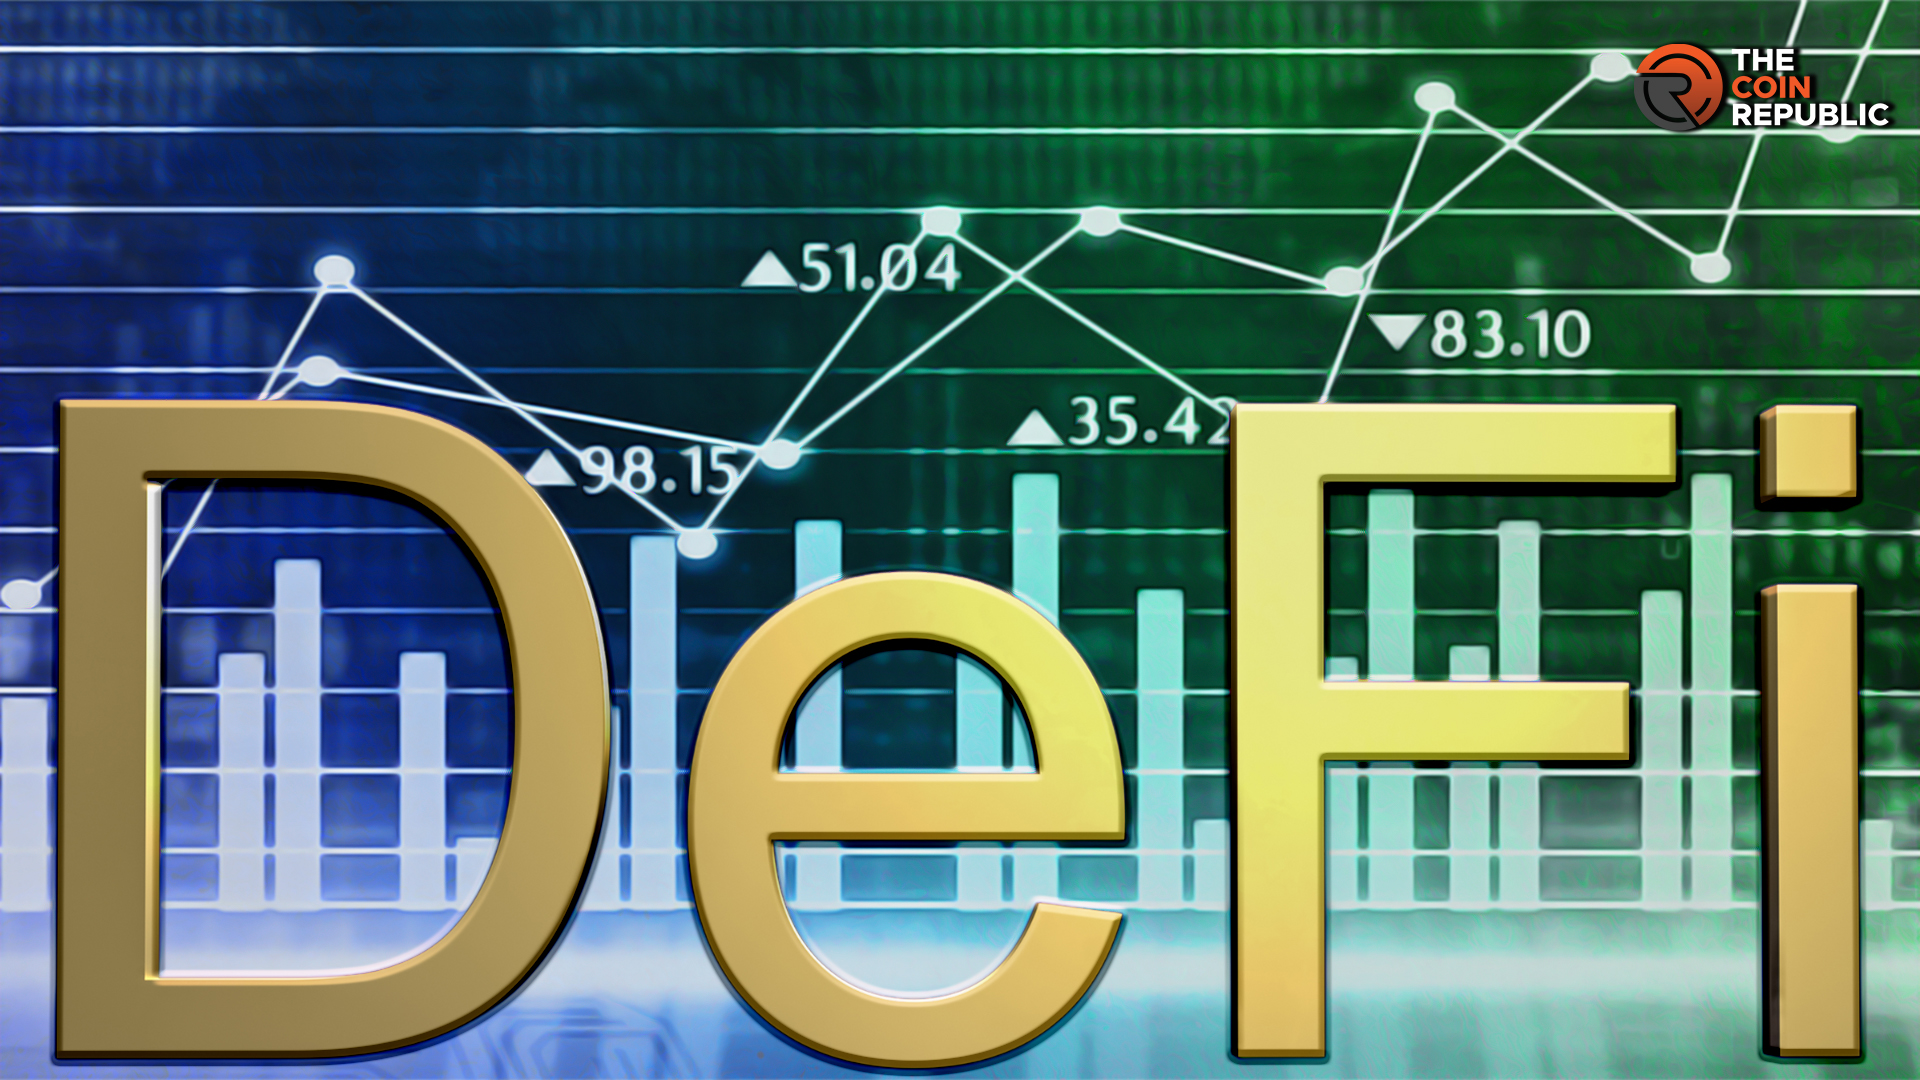 Defi Market Expected to Reach $71 Billion by 2028- Report